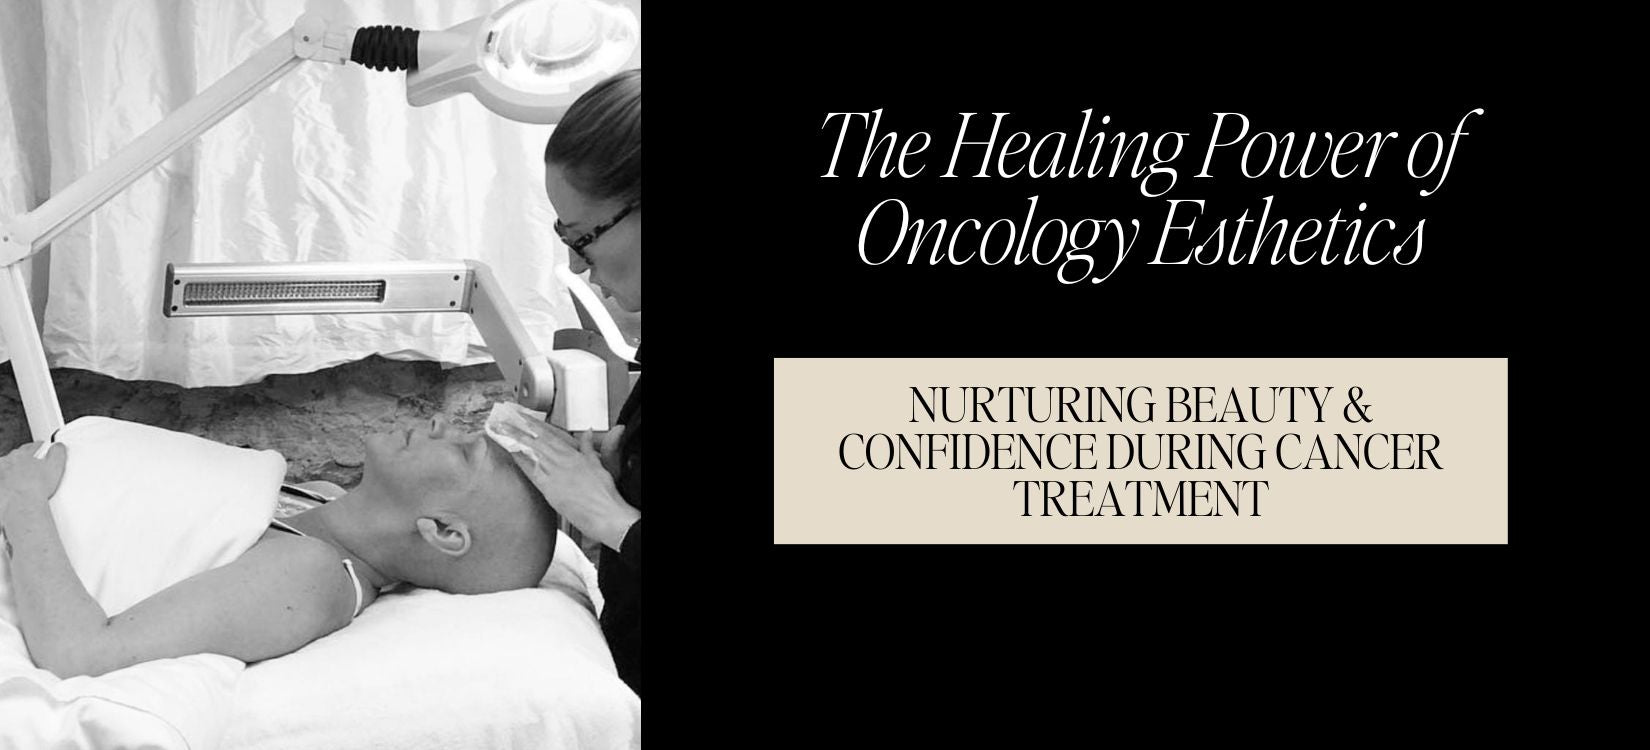 The Role of Oncology Esthetics in Cancer Care